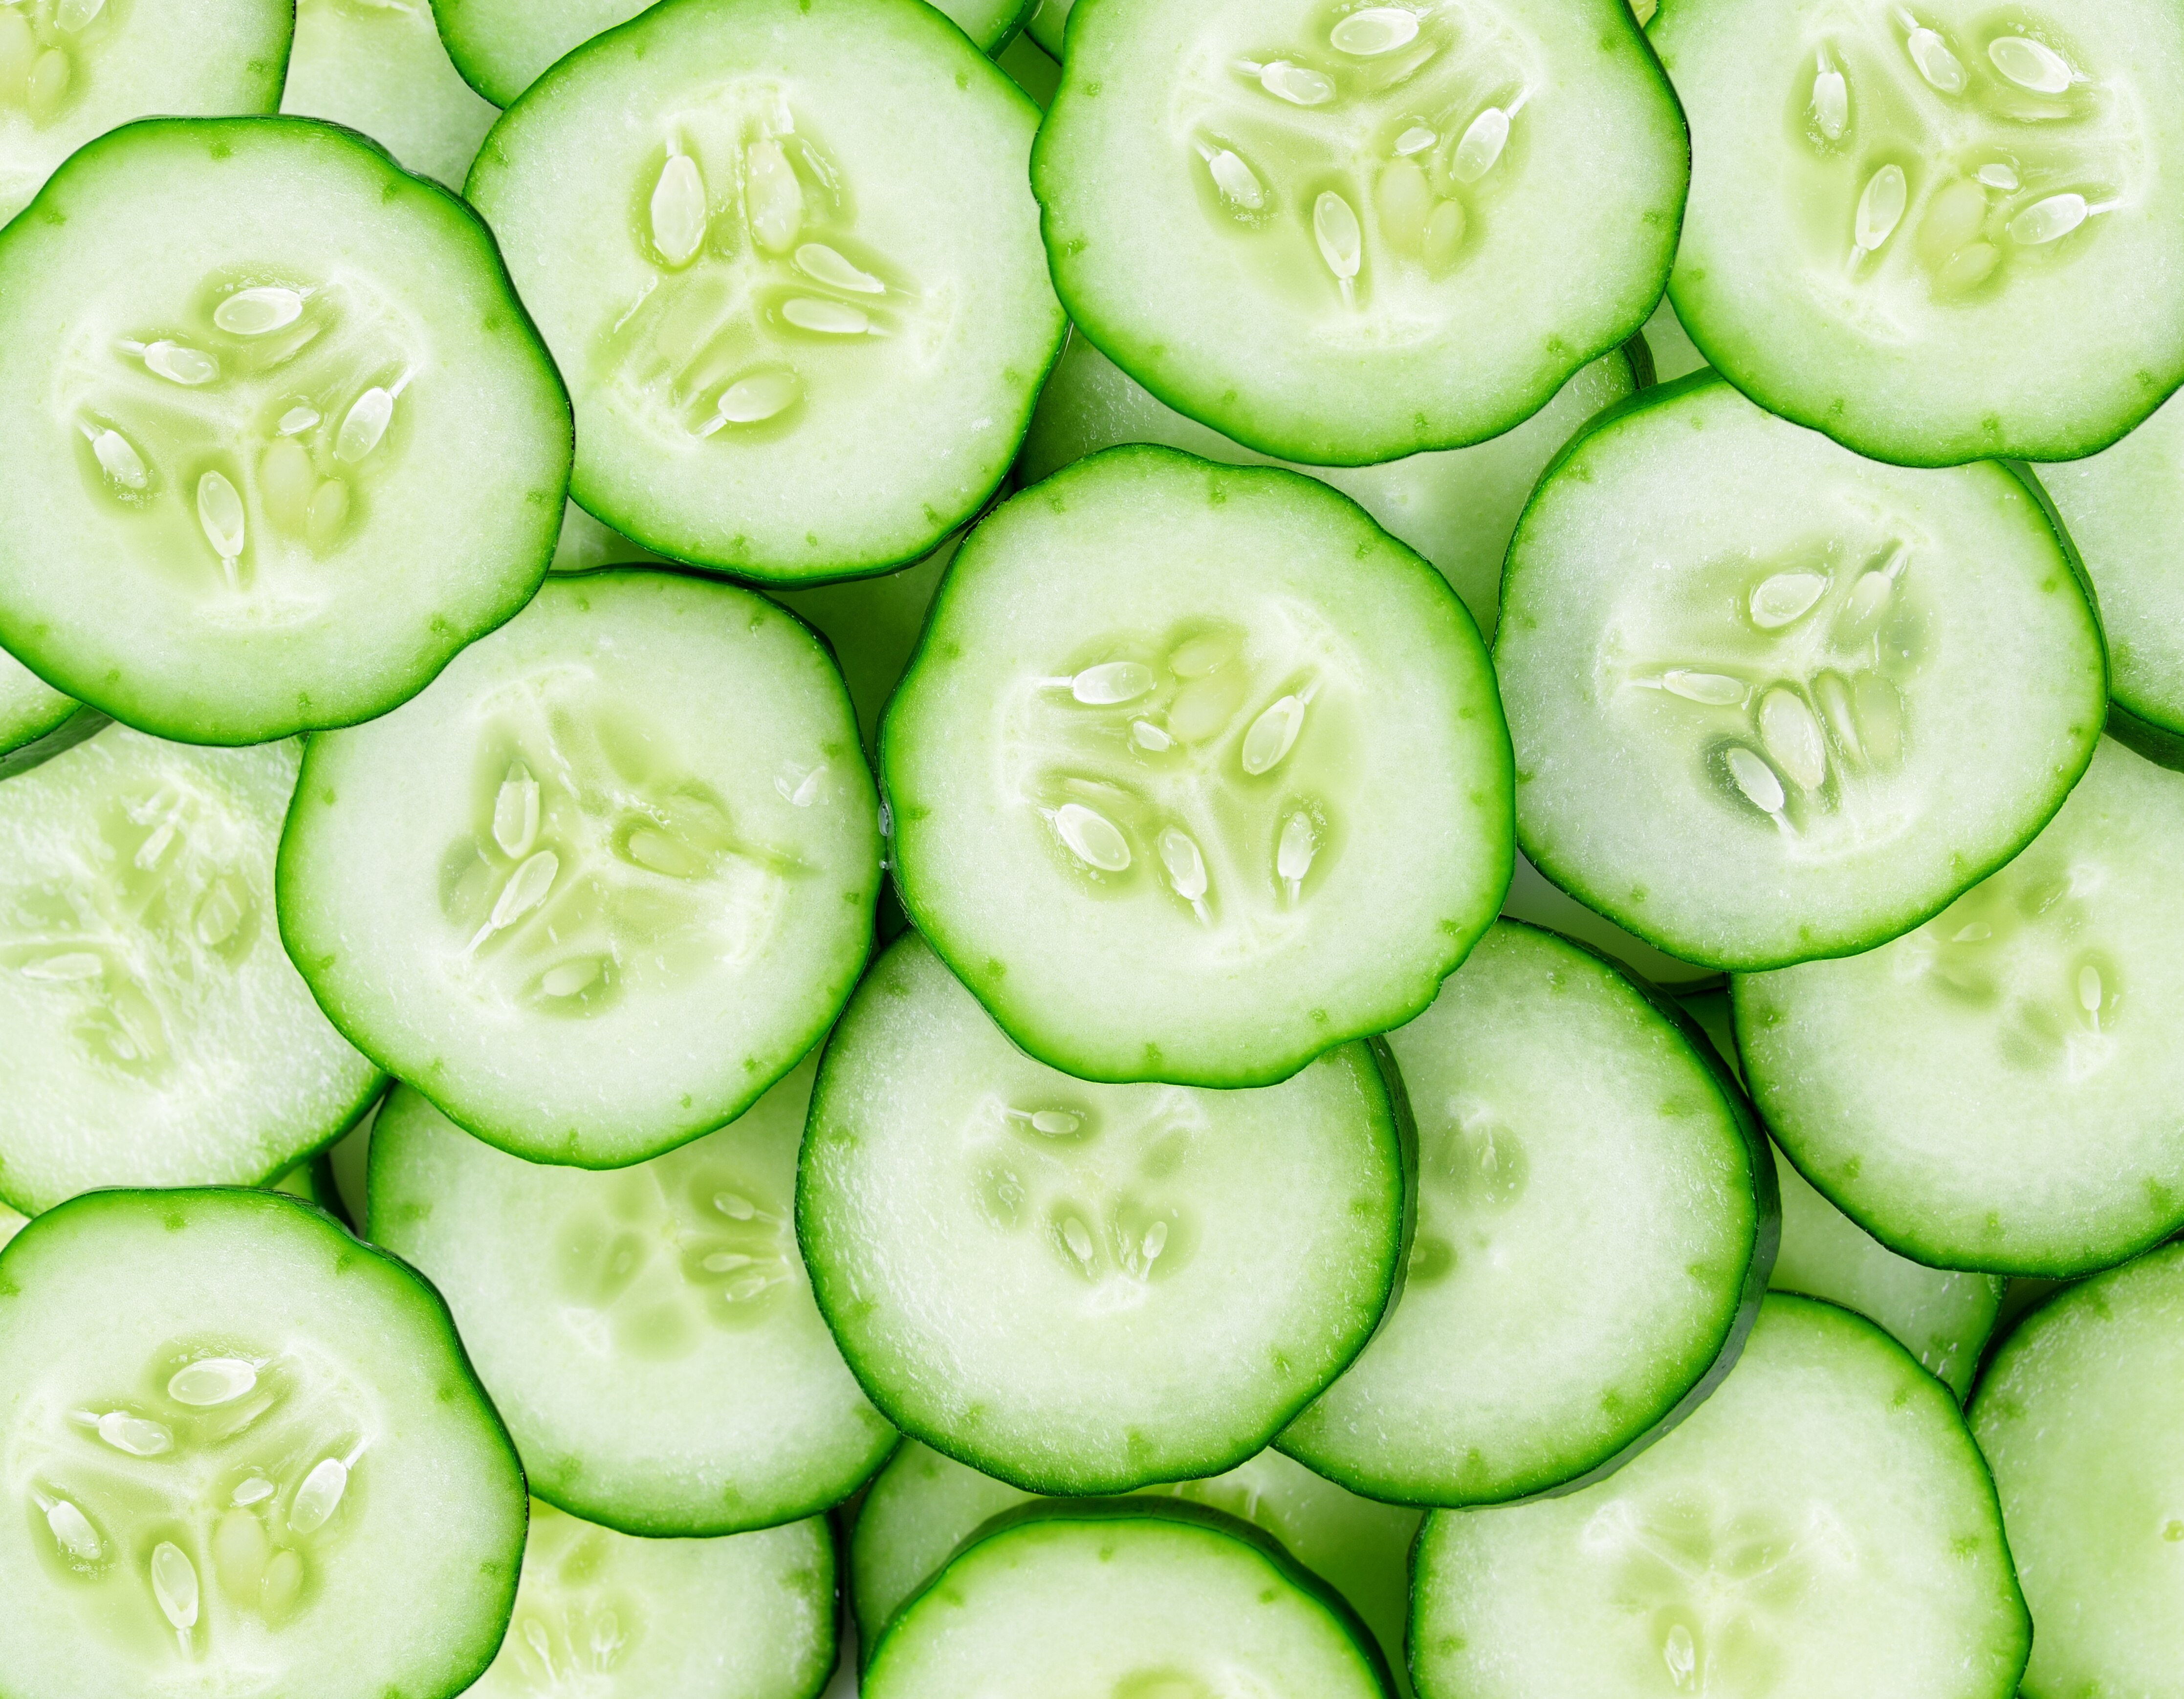 How to grow, store and eat cucumbers